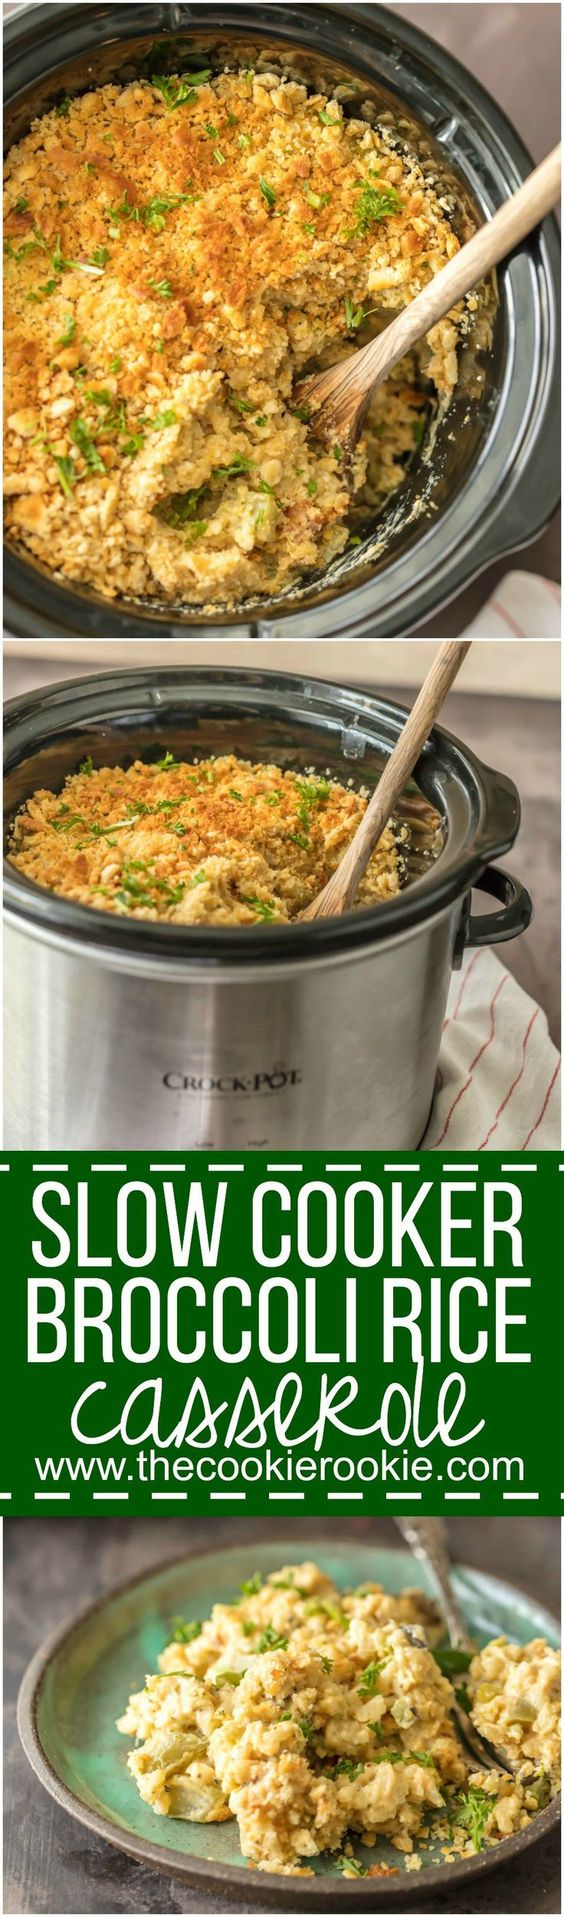 Get insider info on the best ever crock pot recipes with this article. | easy crock pot dinner recipes | easy slow cooker meals | healthy slow cooker recipes | best rated crock pot recipes #mealprep #nutrition #healthymeals #healthyrecipes #healthyeating #health #diets #healthyhabits #healthylife